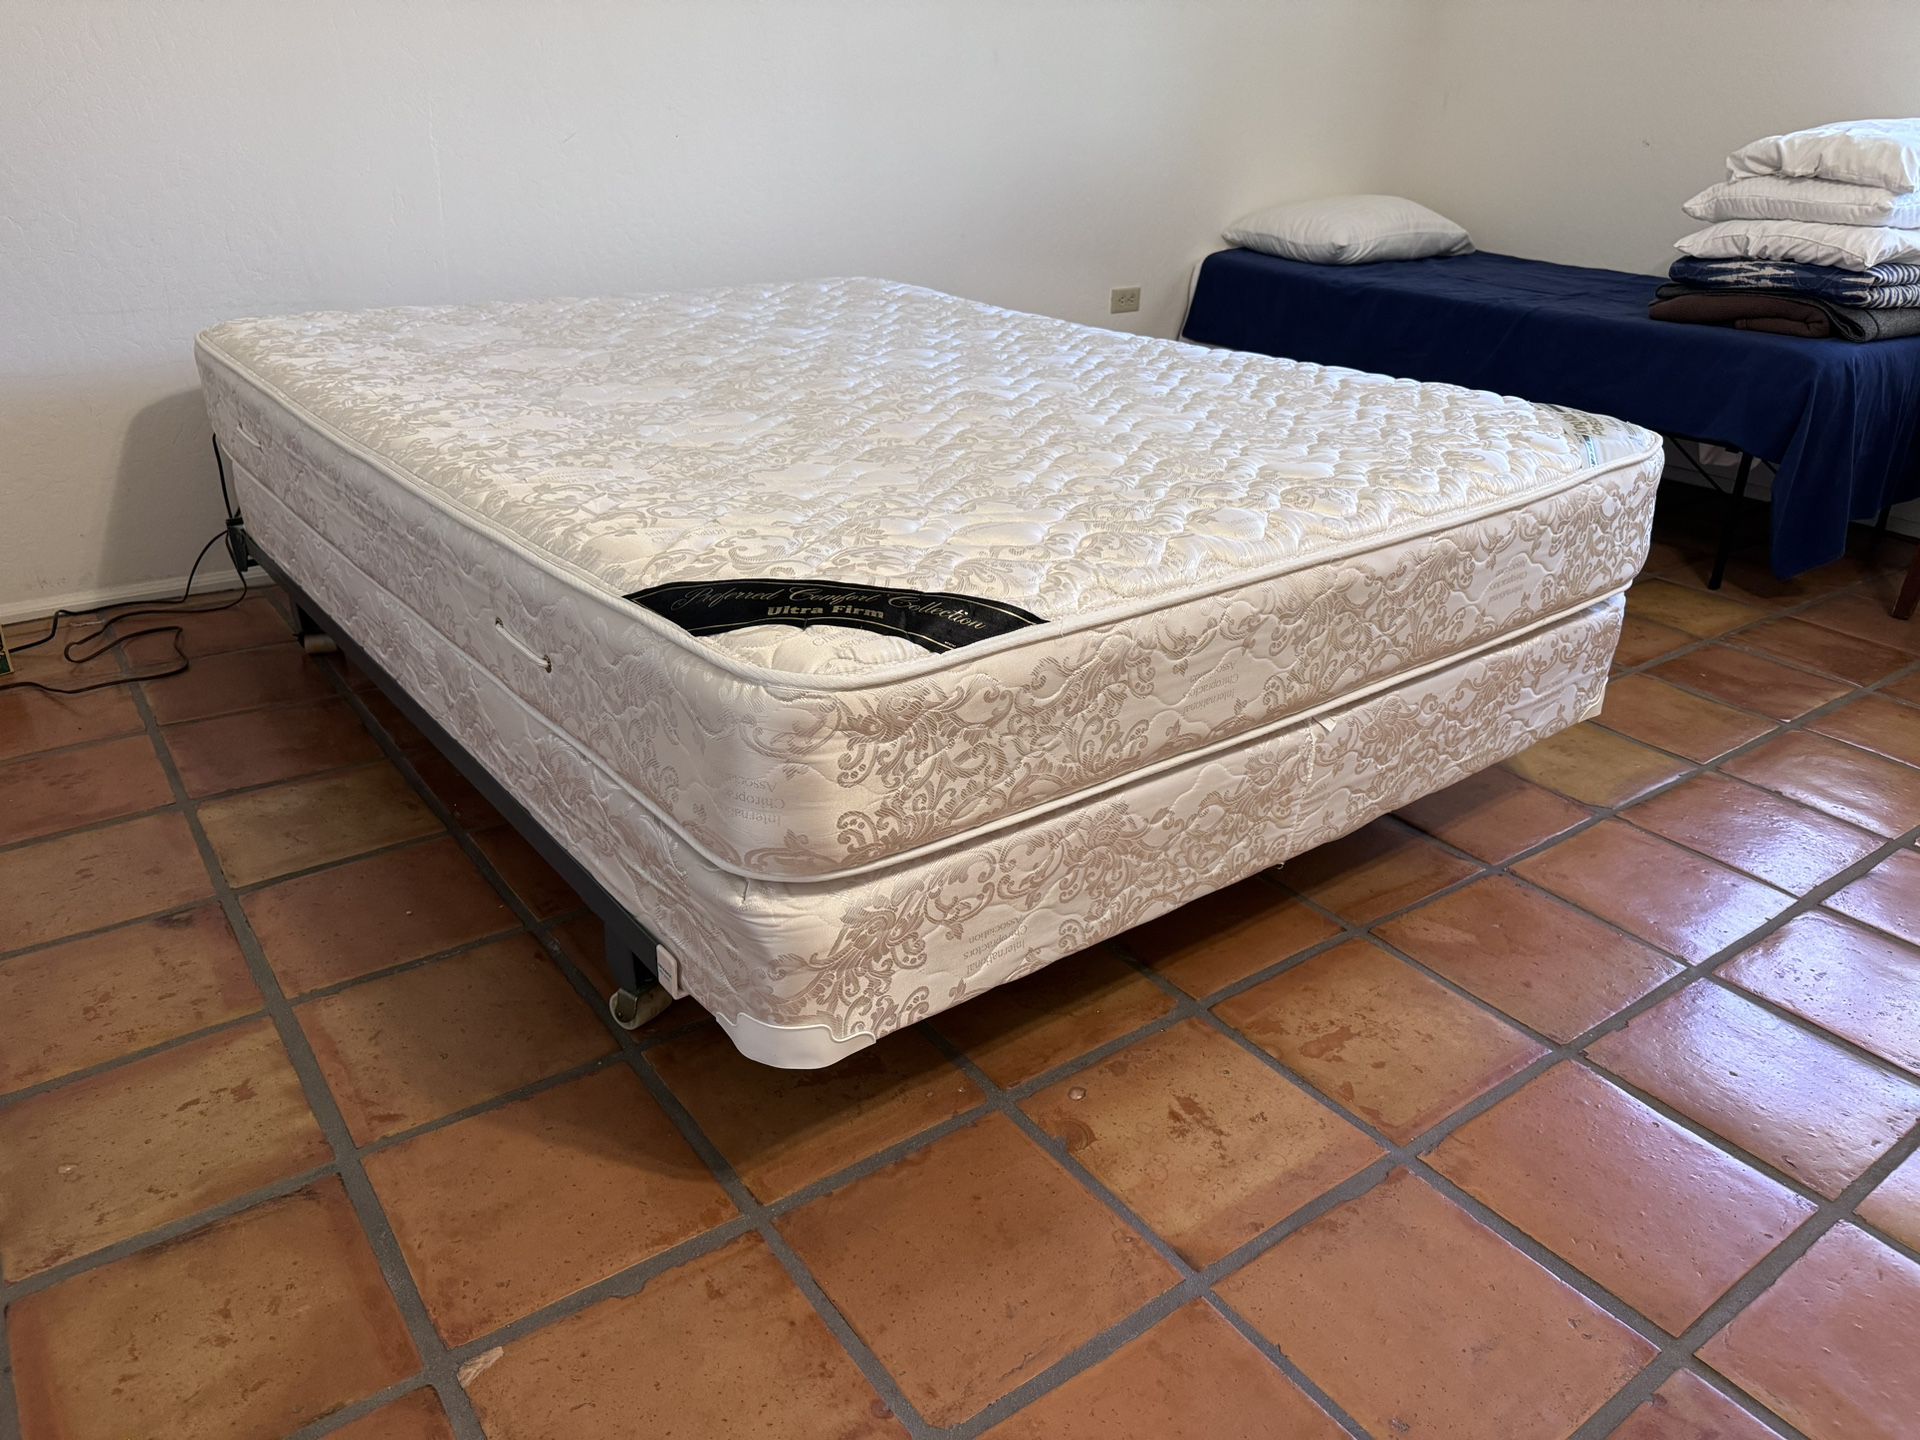 Firm Queen mattress and boxspring with base rails